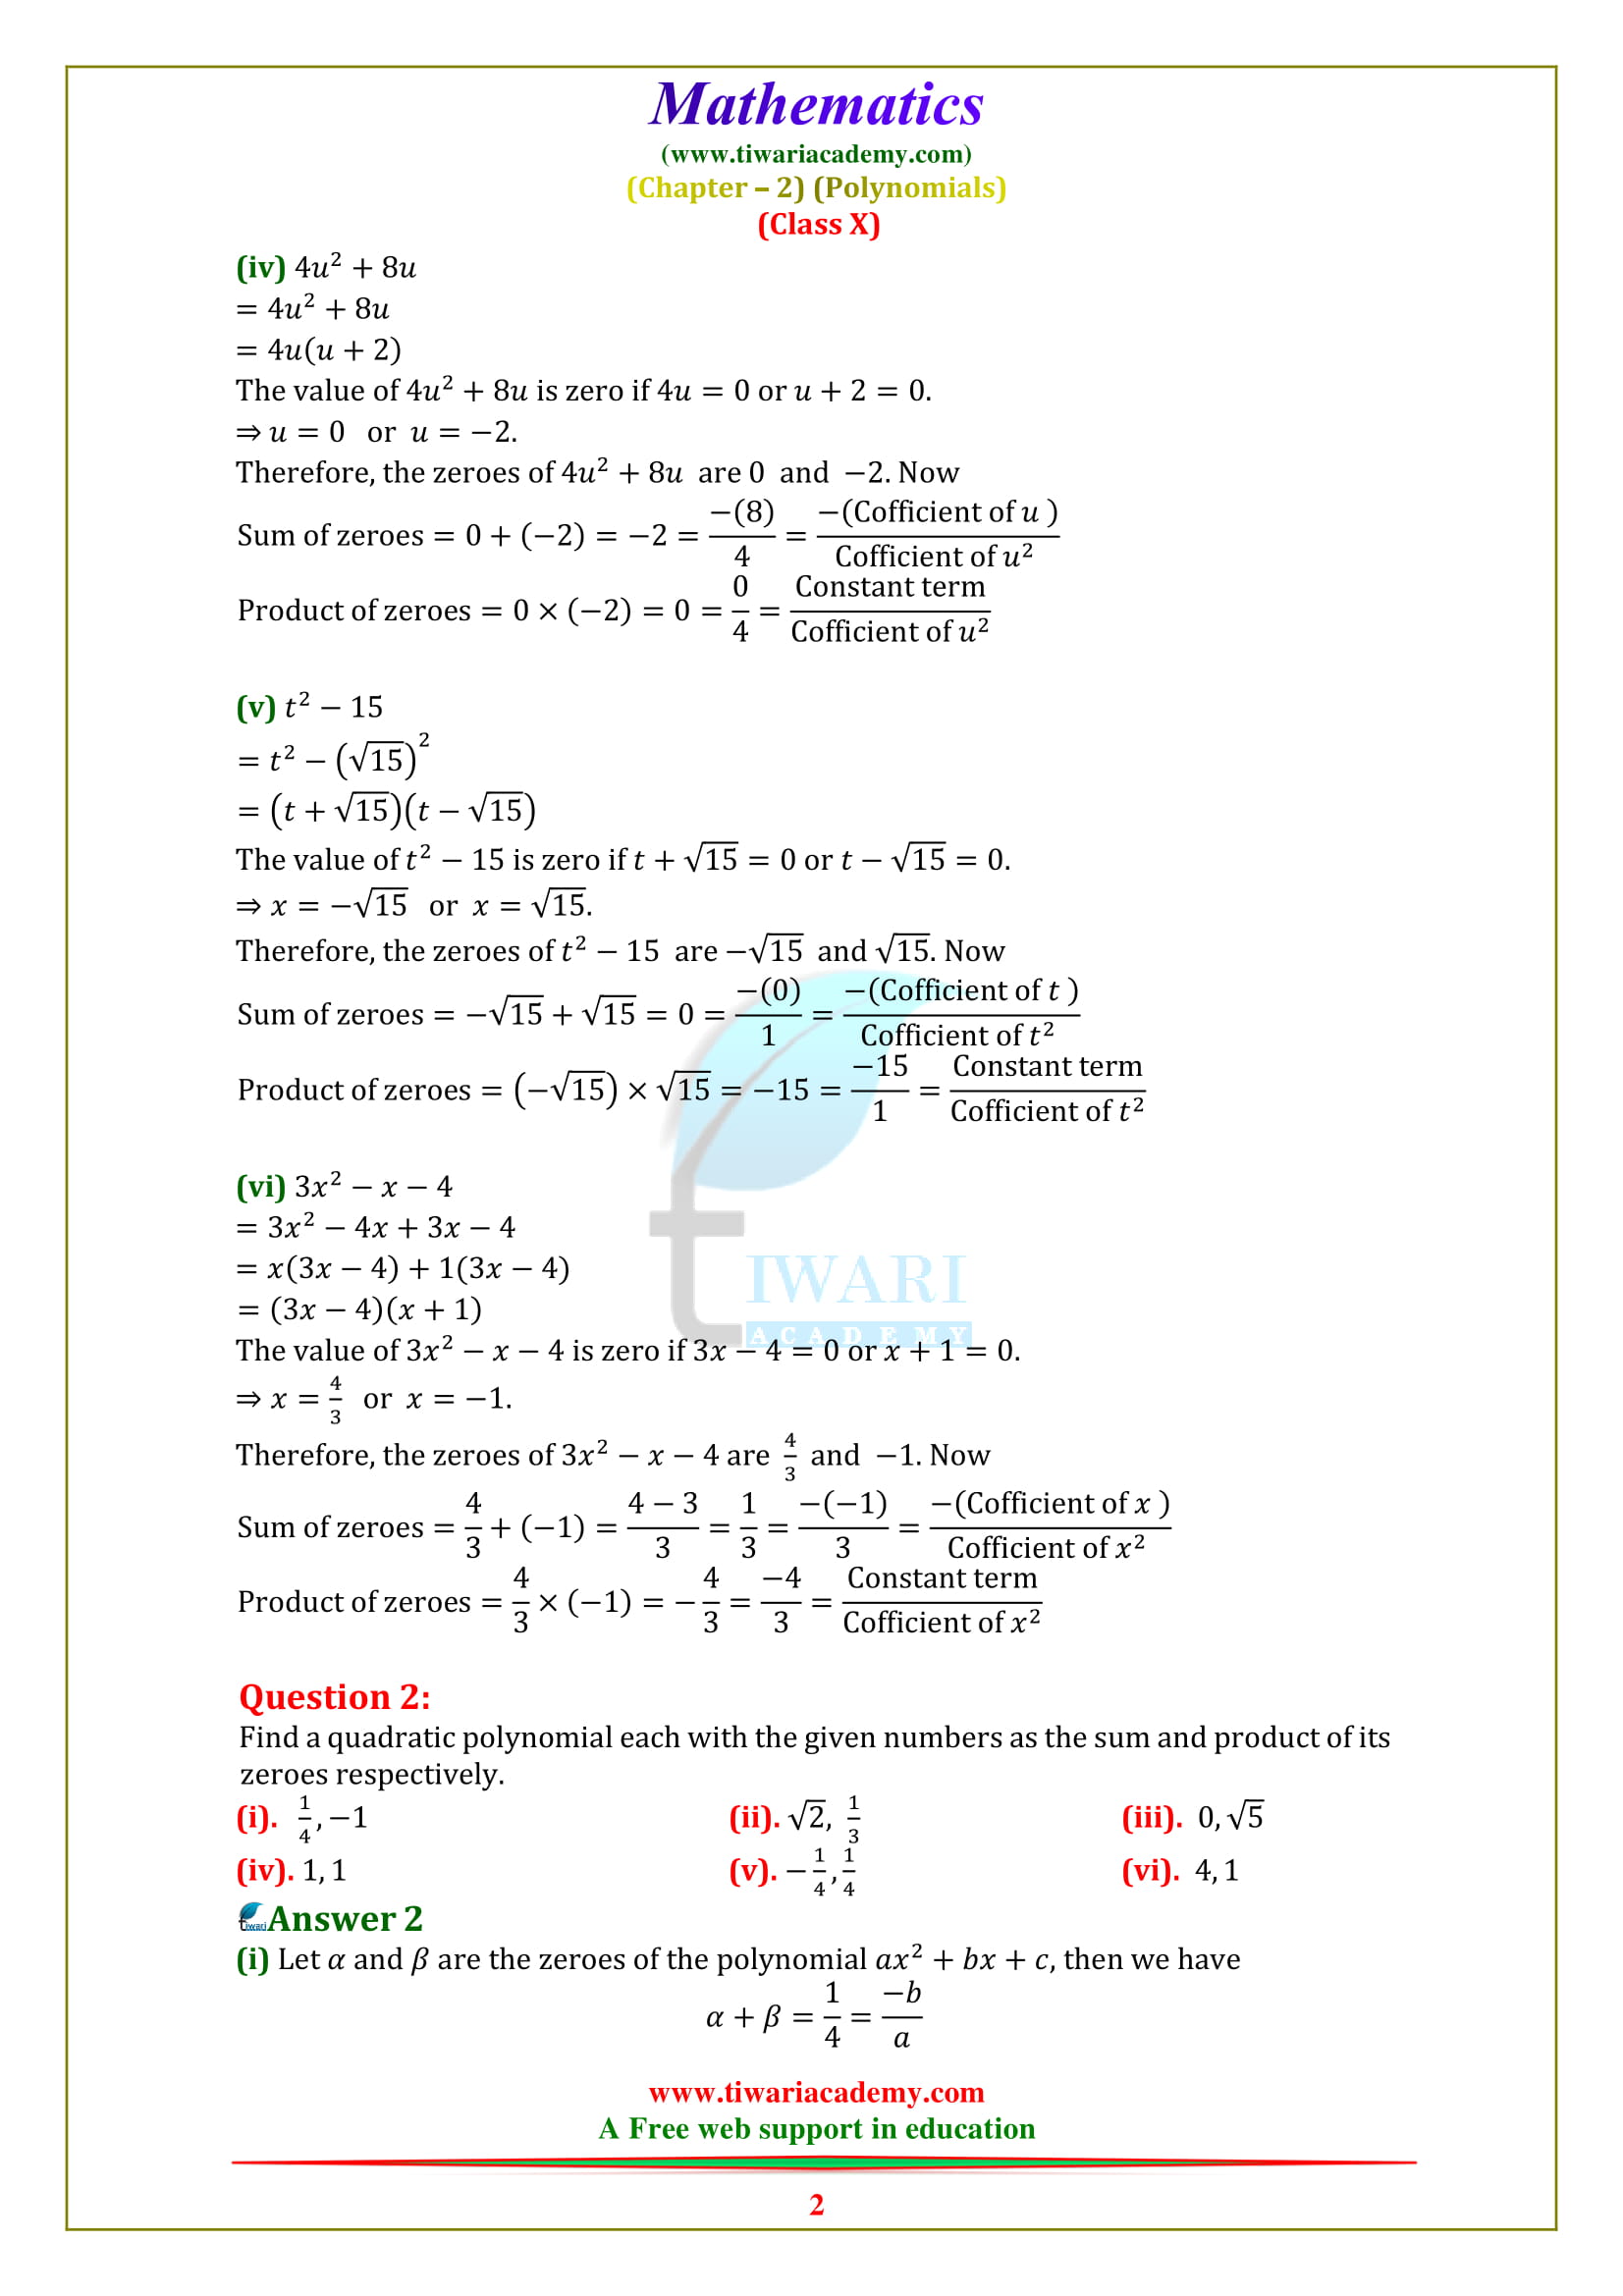 NCERT Solutions for class 10 Maths Chapter 2 Exercise 2.2 in English medium